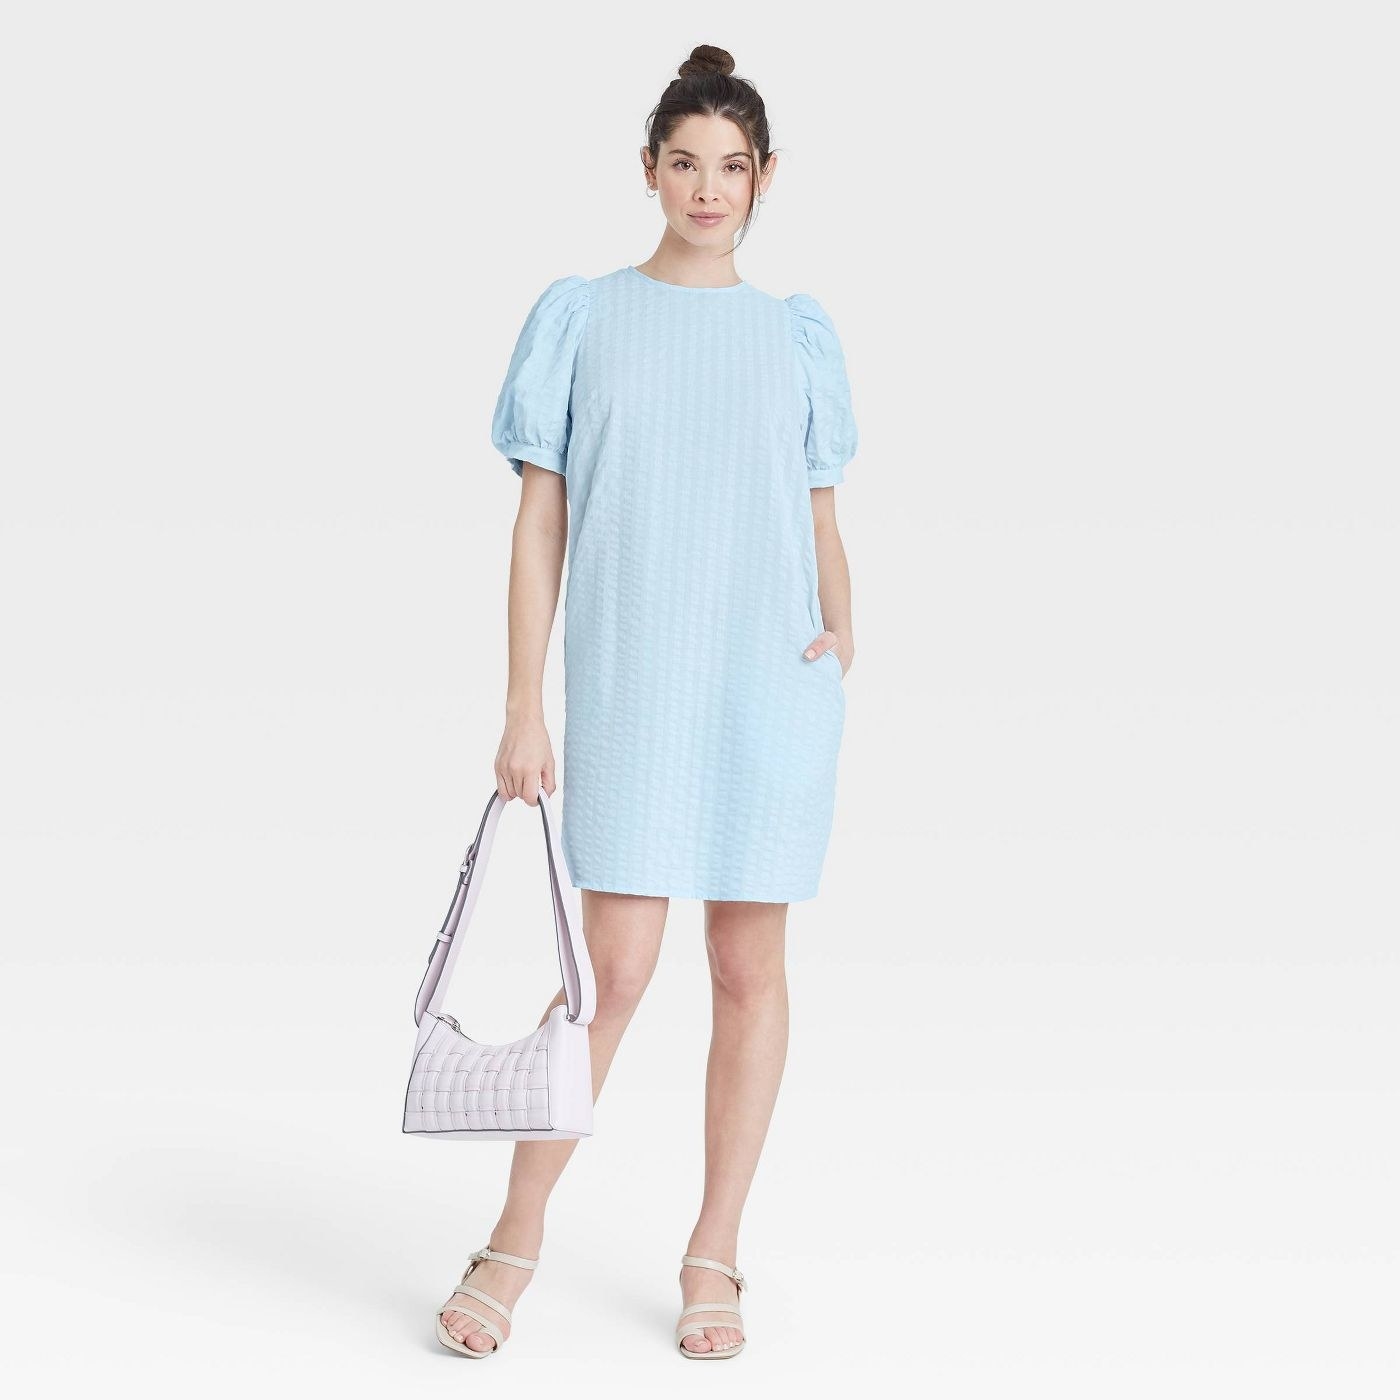 Model wearing blue dress with puff sleeves, goes past the thighs